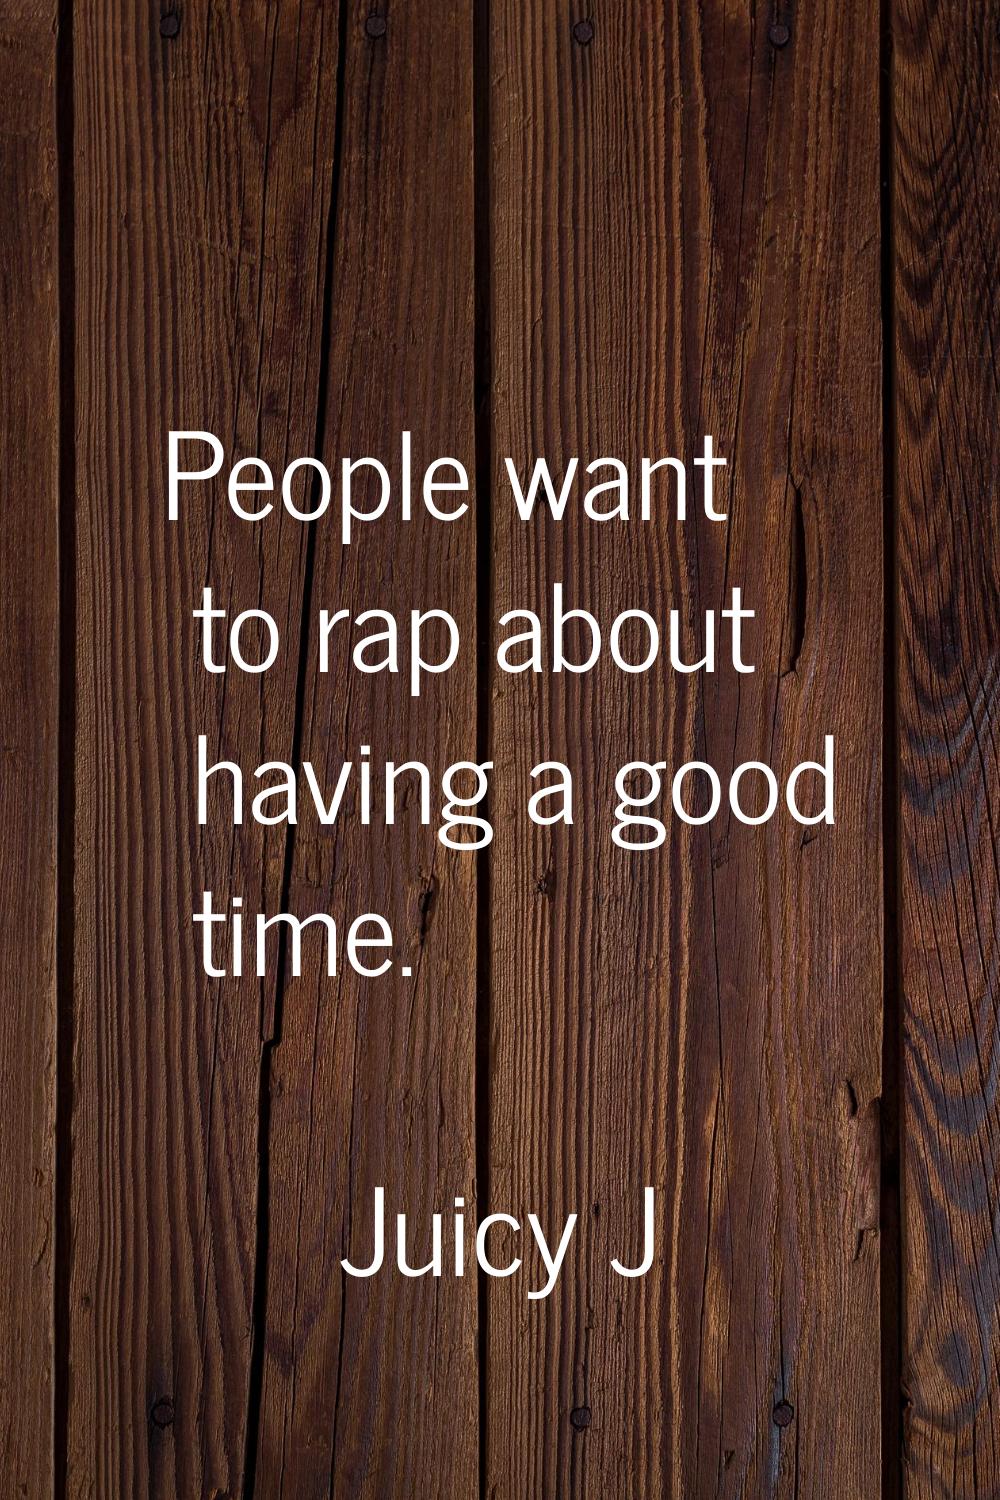 People want to rap about having a good time.